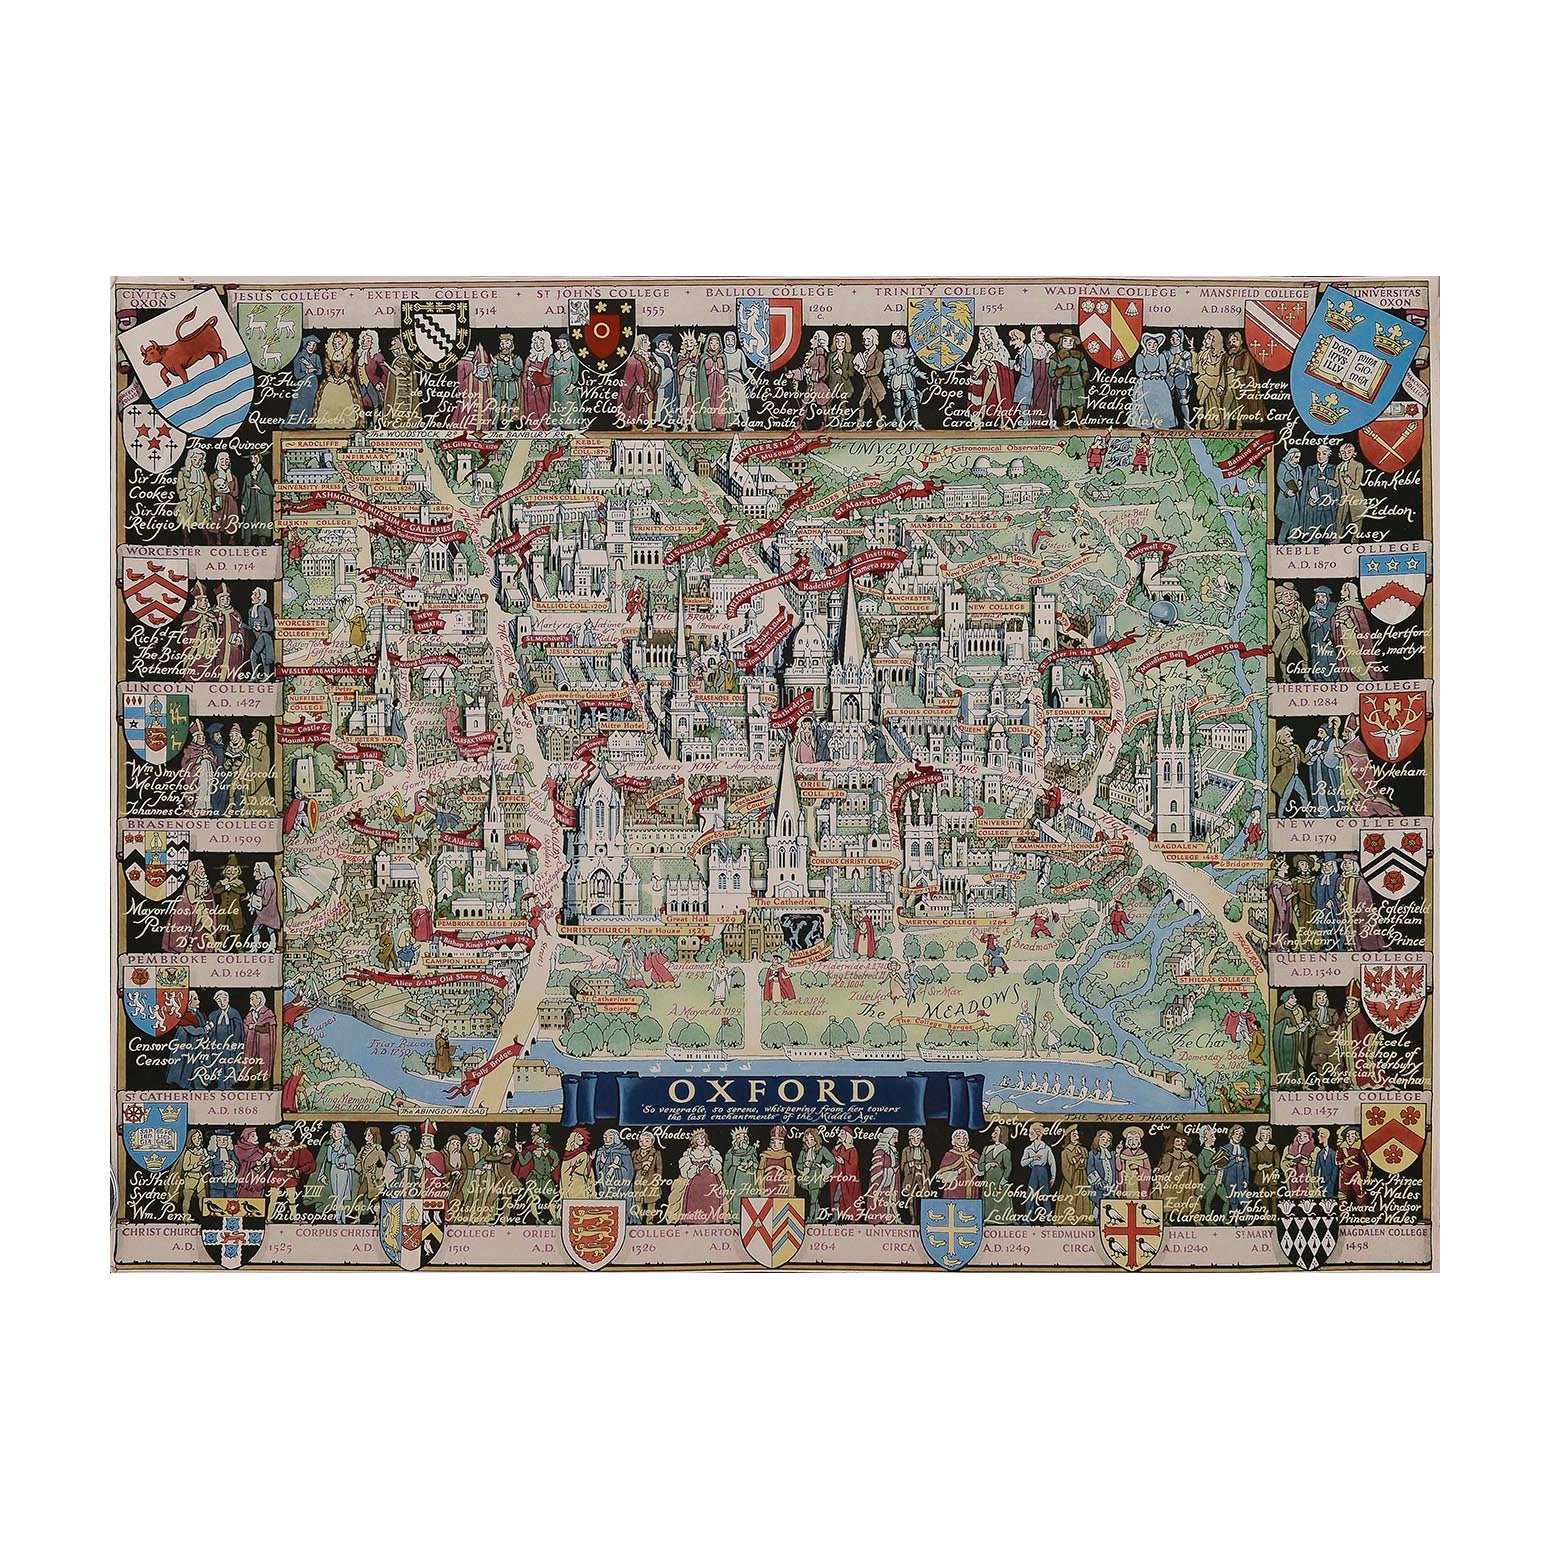 pictorial poster map of Oxford by the noted poster artist Kerry Lee, published by the British Travel Association, 1948. This highly decorative map is full of period charm, including depictions of Oxford colleges, students, historical buildings, and places etc. The decorative border features the coats of arms of Oxford University’s many colleges